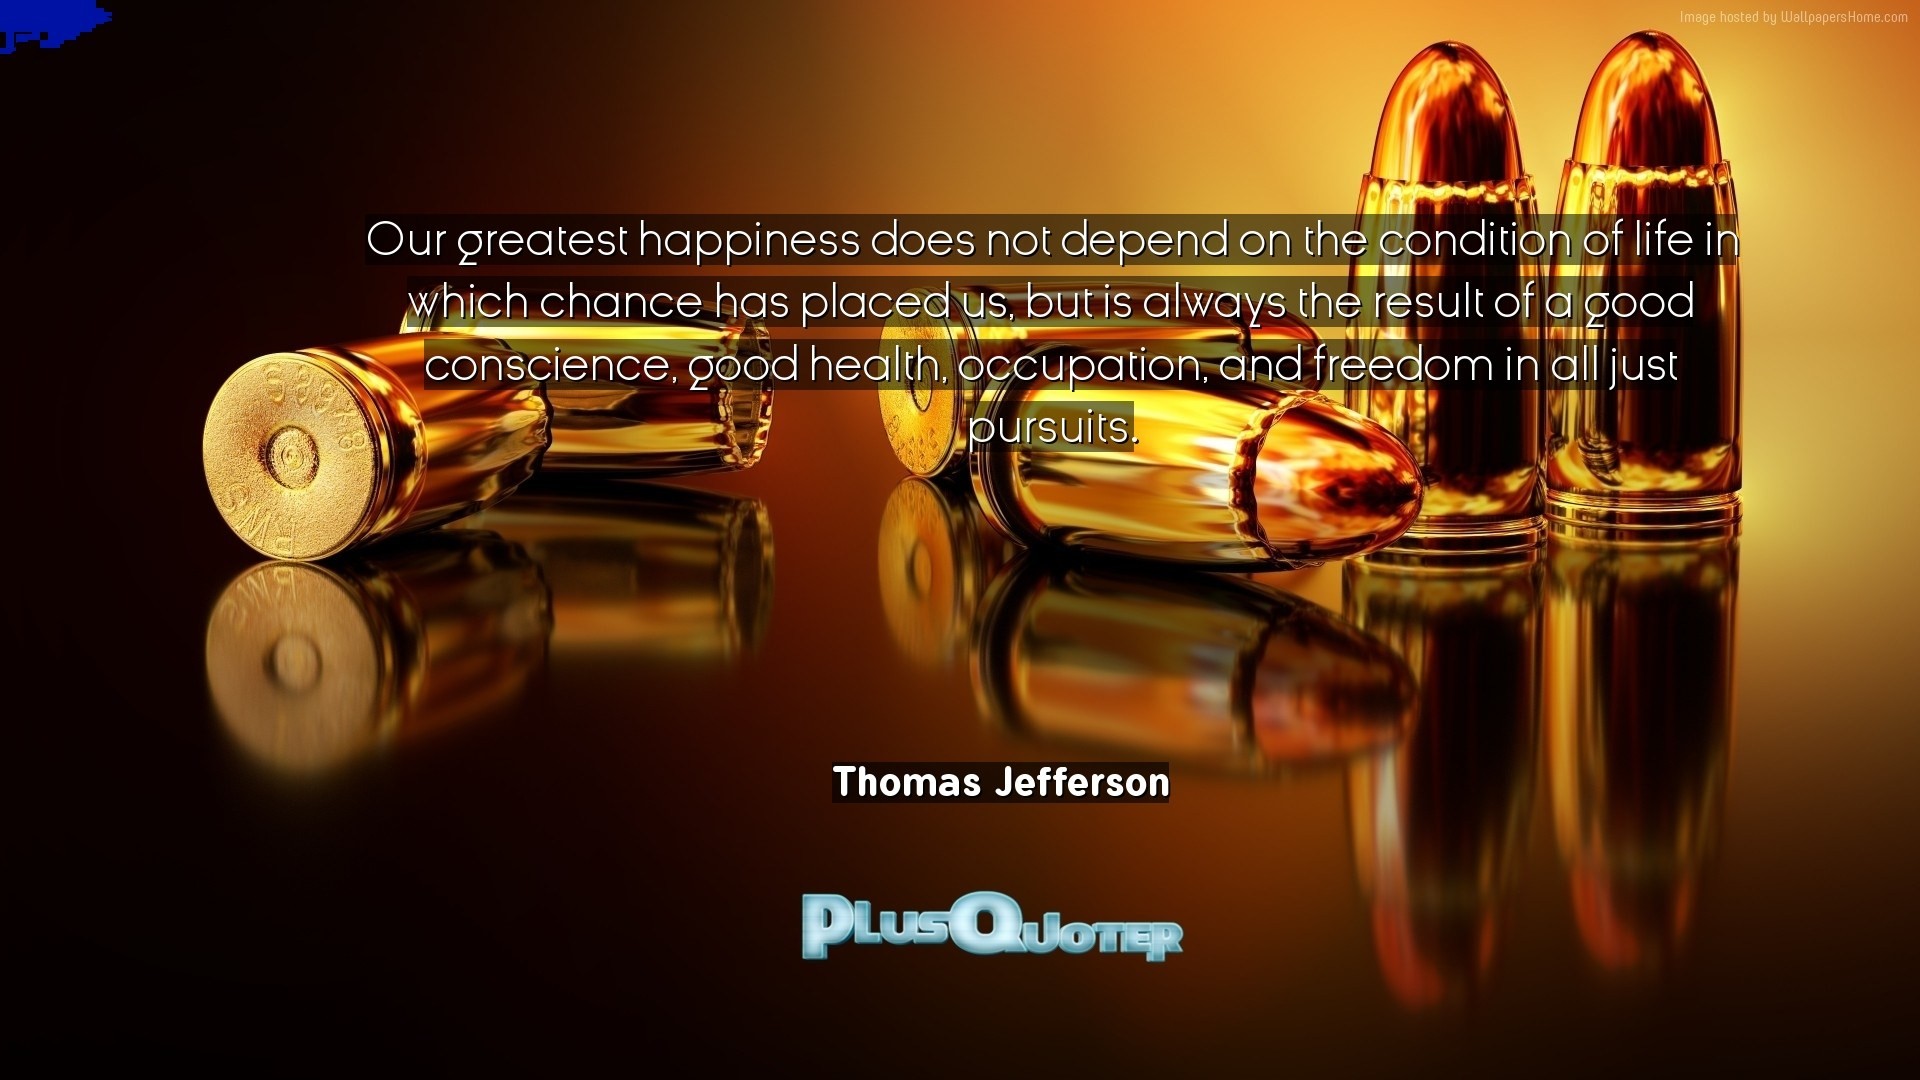 1920x1080 Download Wallpaper with inspirational Quotes- "Our greatest happiness does  not depend on the condition